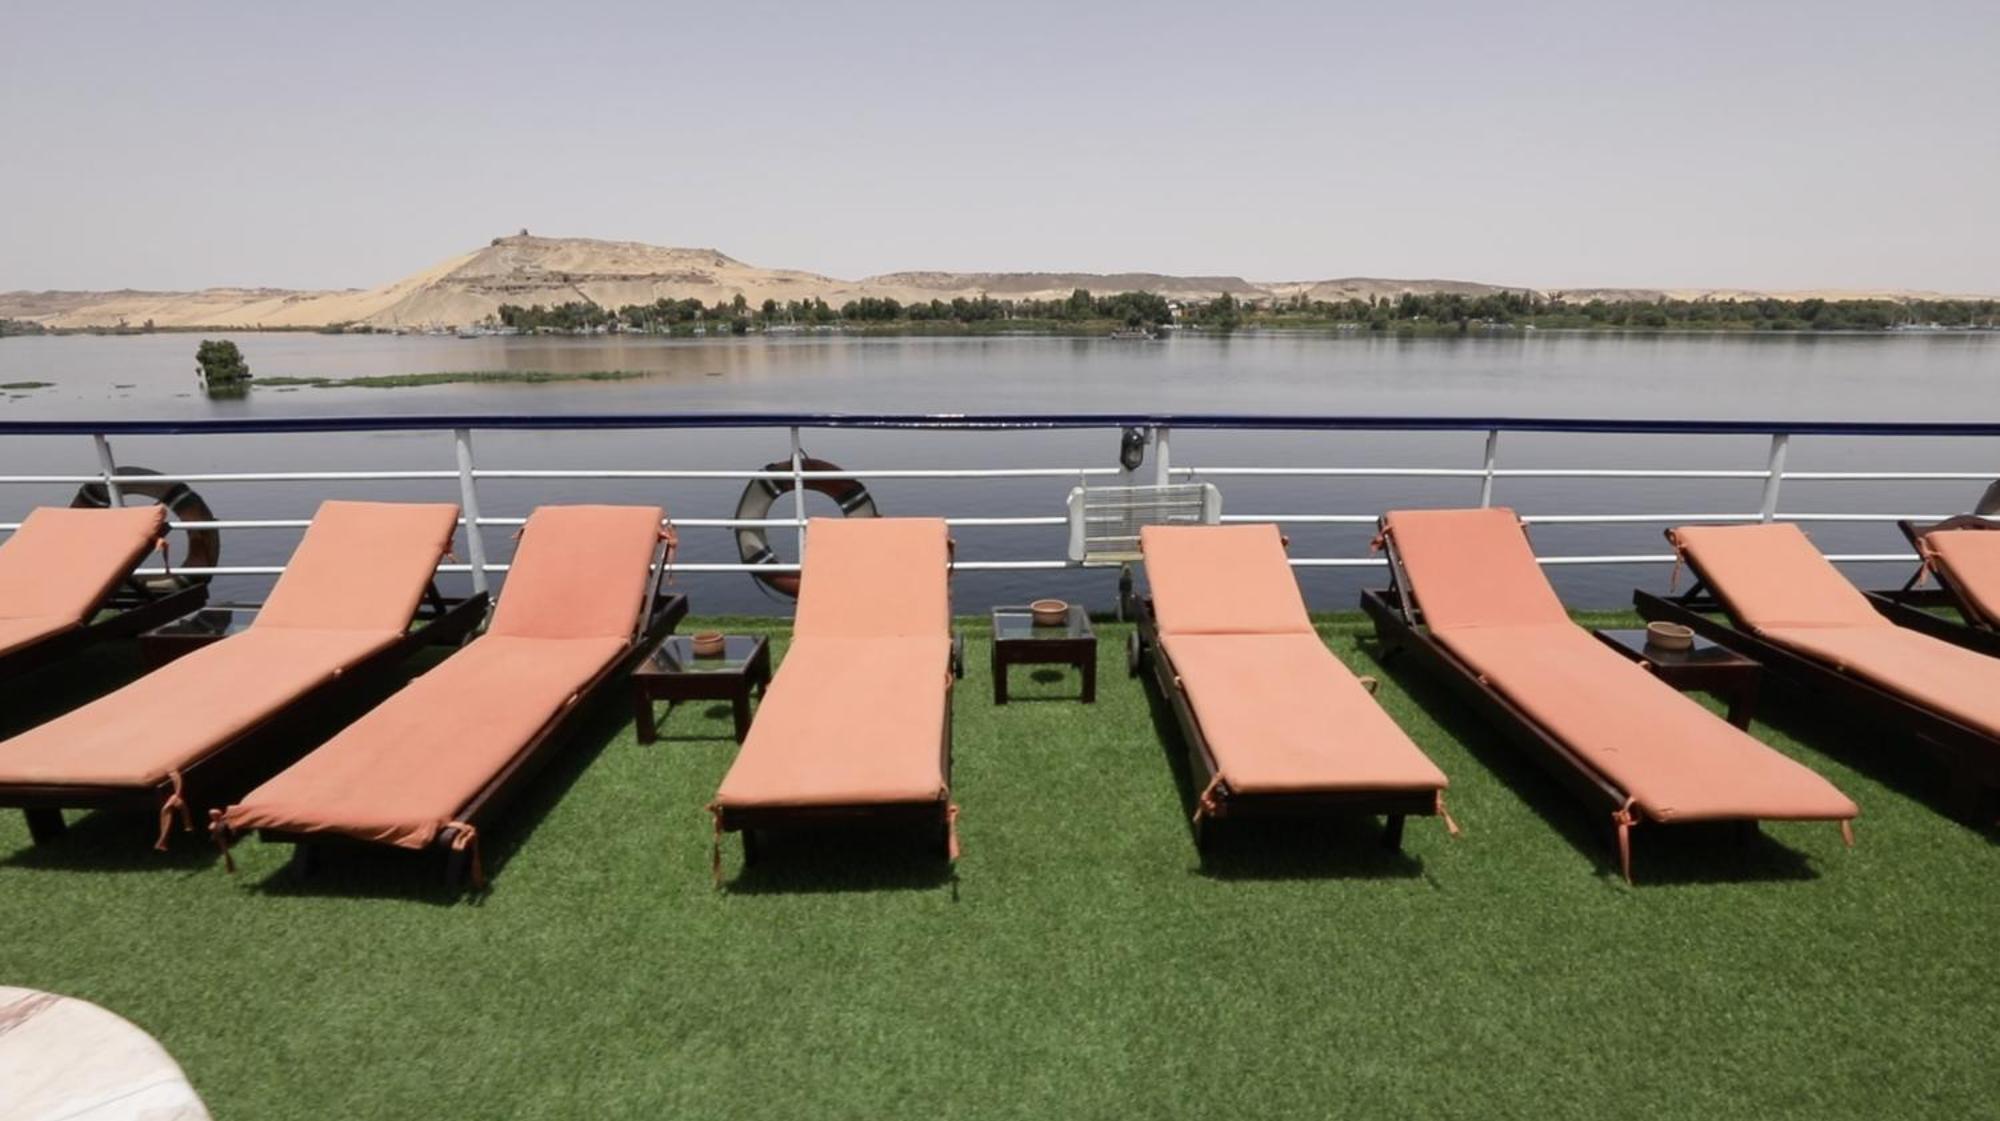 M/S Royal Adventure - Saturday From Luxor 4 Or 7 Nights - Wednesday From Aswan 3 Or 7 Nights Hotel Ngoại thất bức ảnh